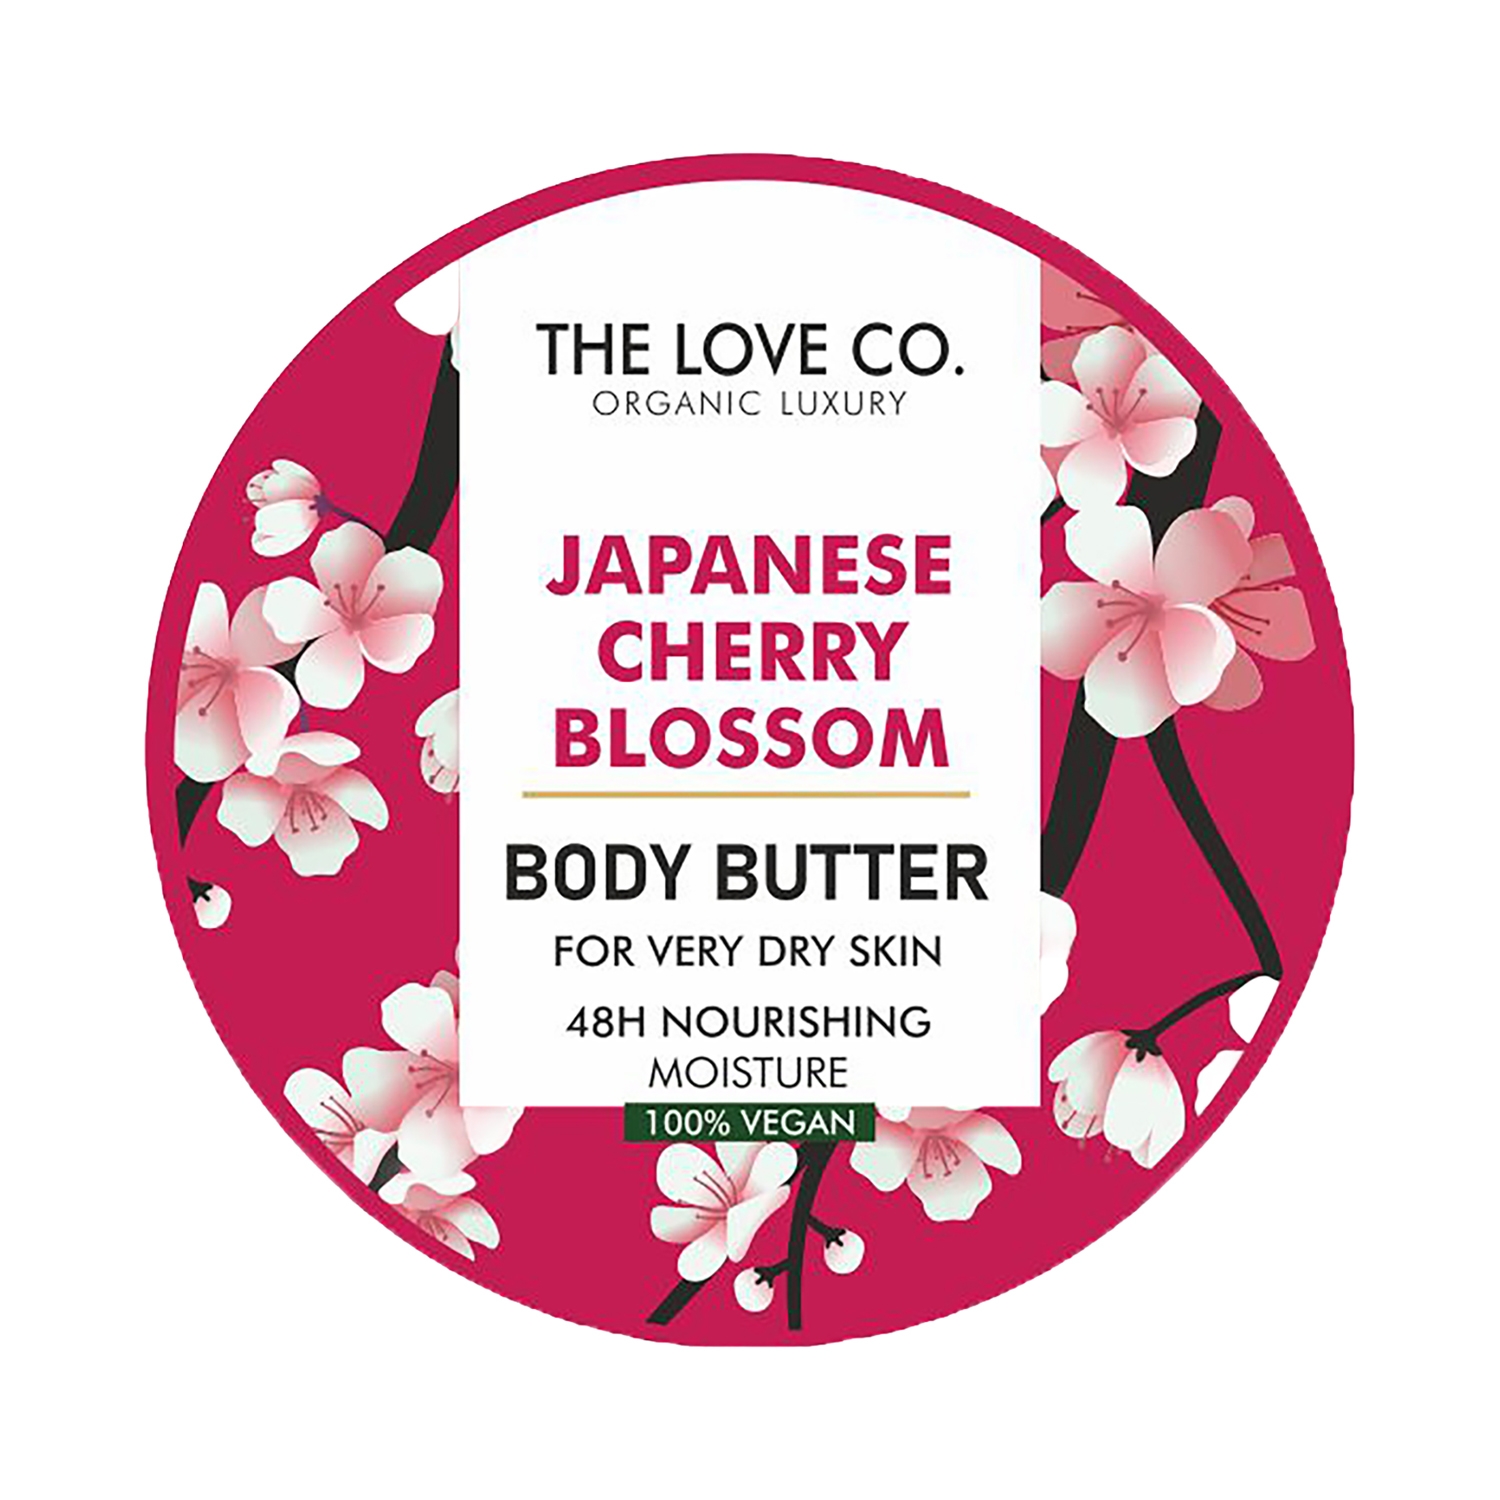 THE LOVE CO. | THE LOVE CO. Japanese Cherry Blossom Body Butter Deep Moisturization With Pure Shea Butter (200g)